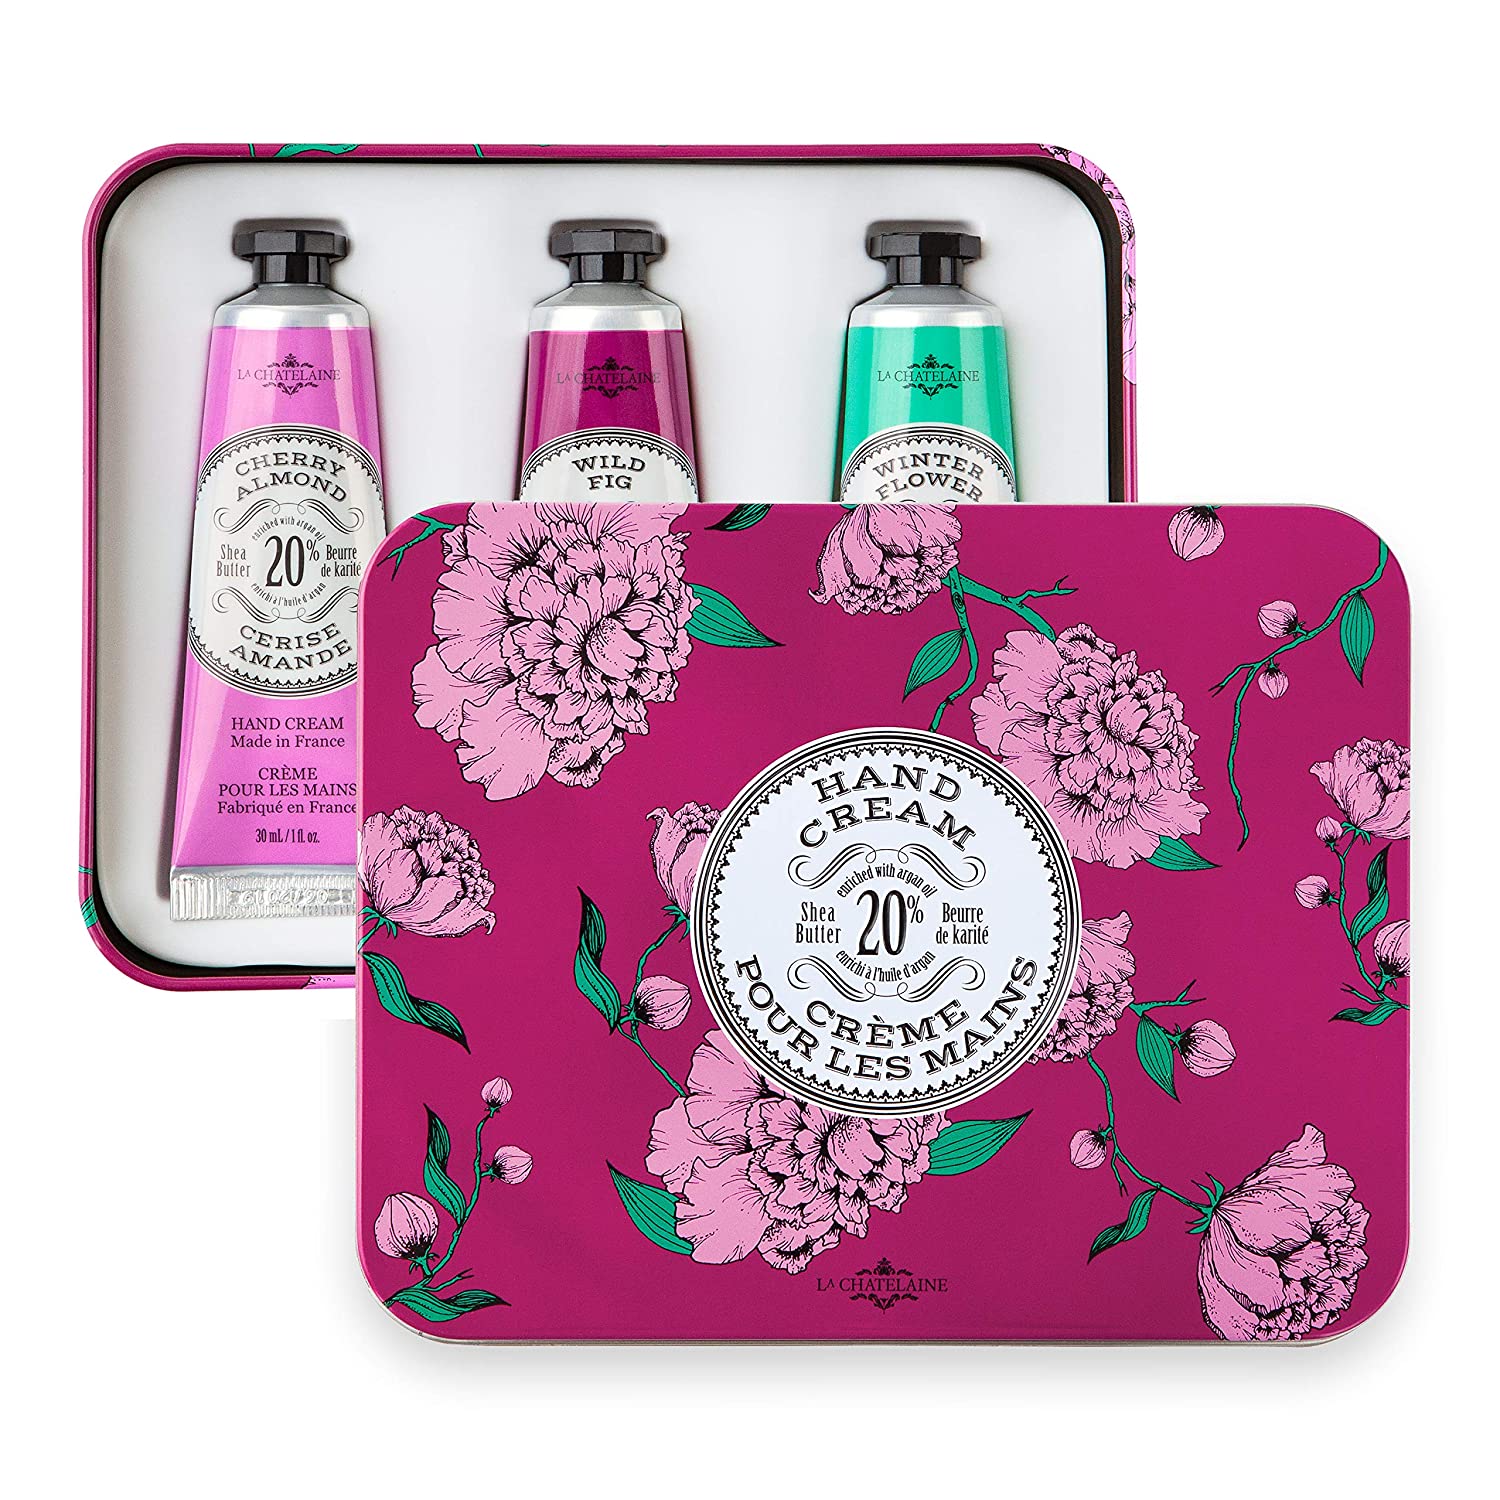 La Chatelaine Deluxe Hand Cream Collection, Cherry Almond, Wild Fig, and Winter Flower - The Finished Room